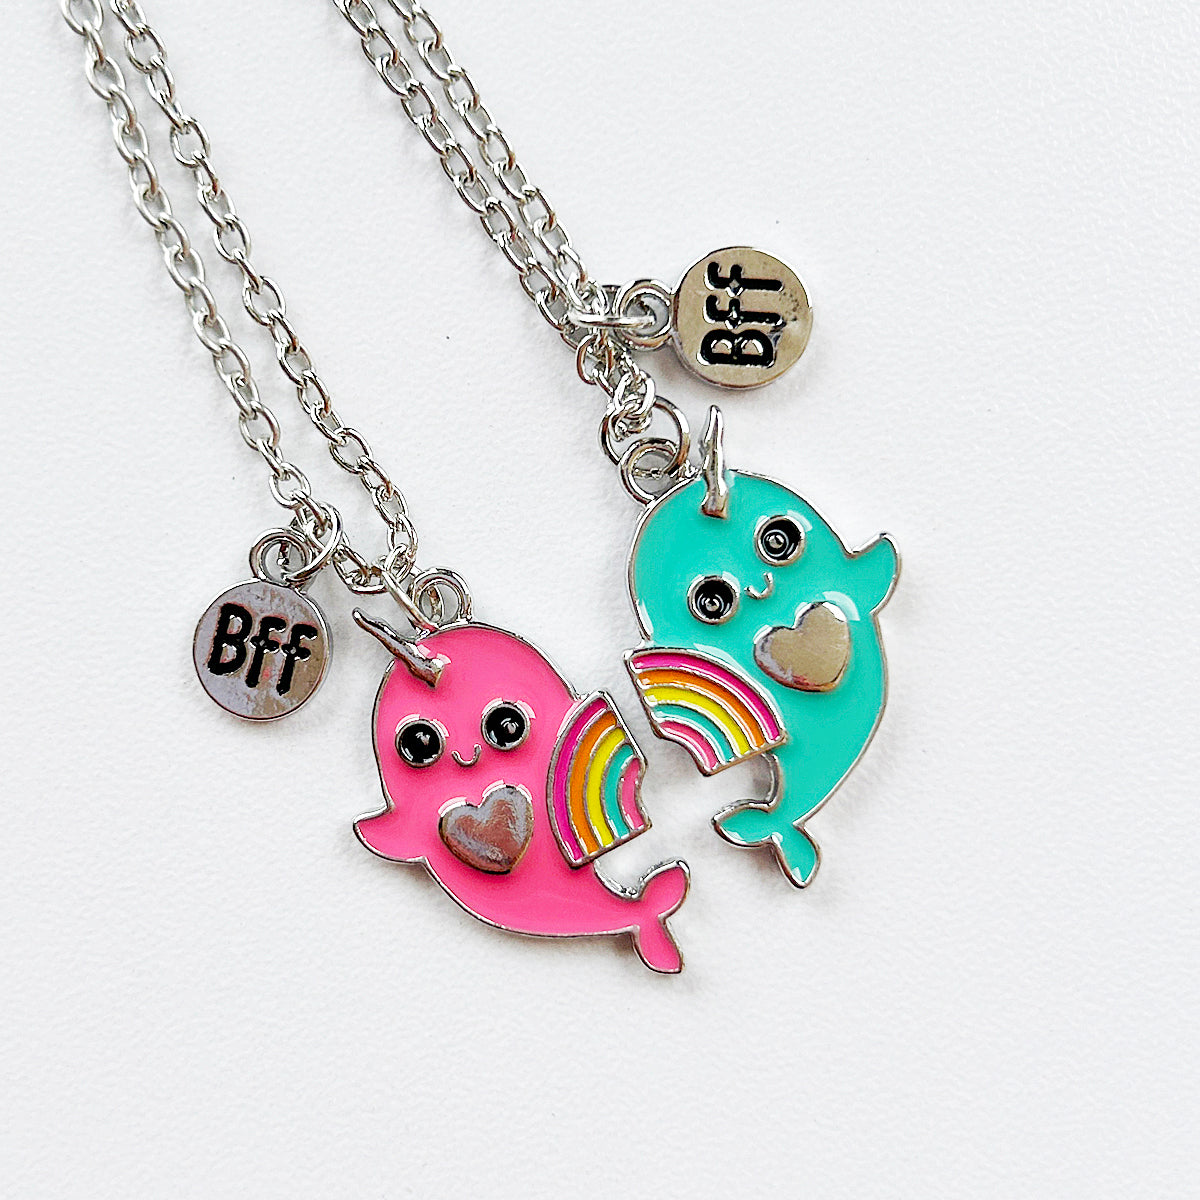 Nawhale Best Friends Necklace